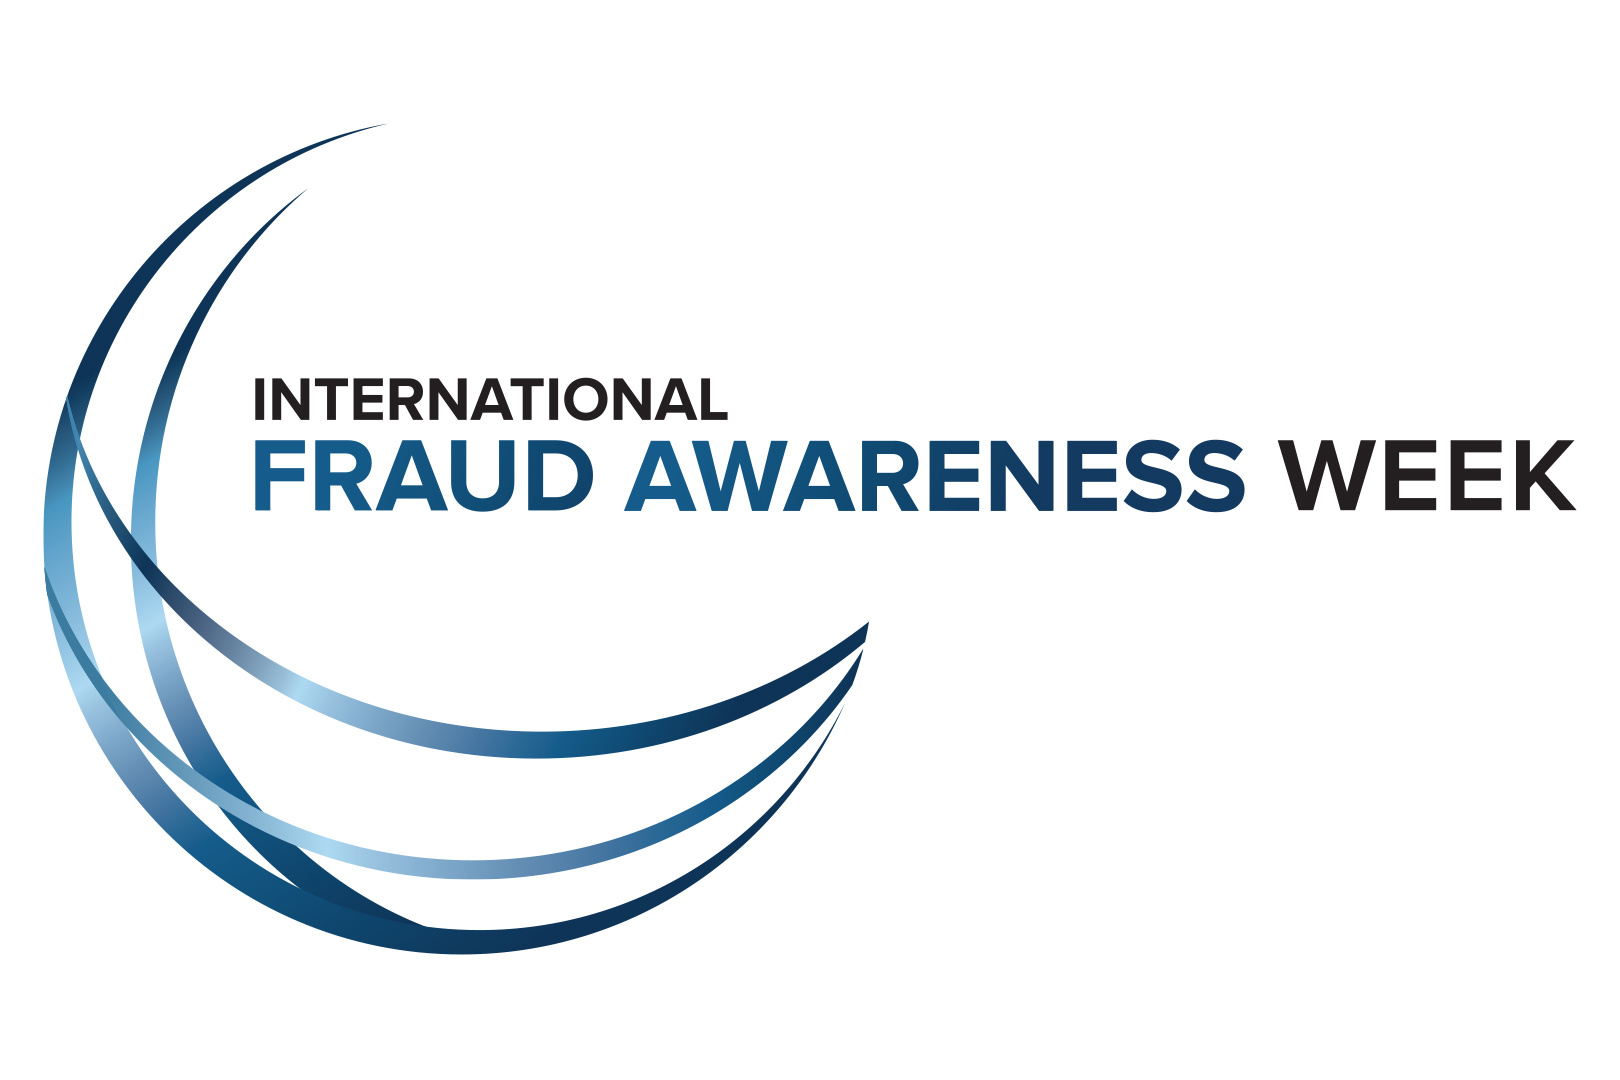 Fraud Week logo without a date